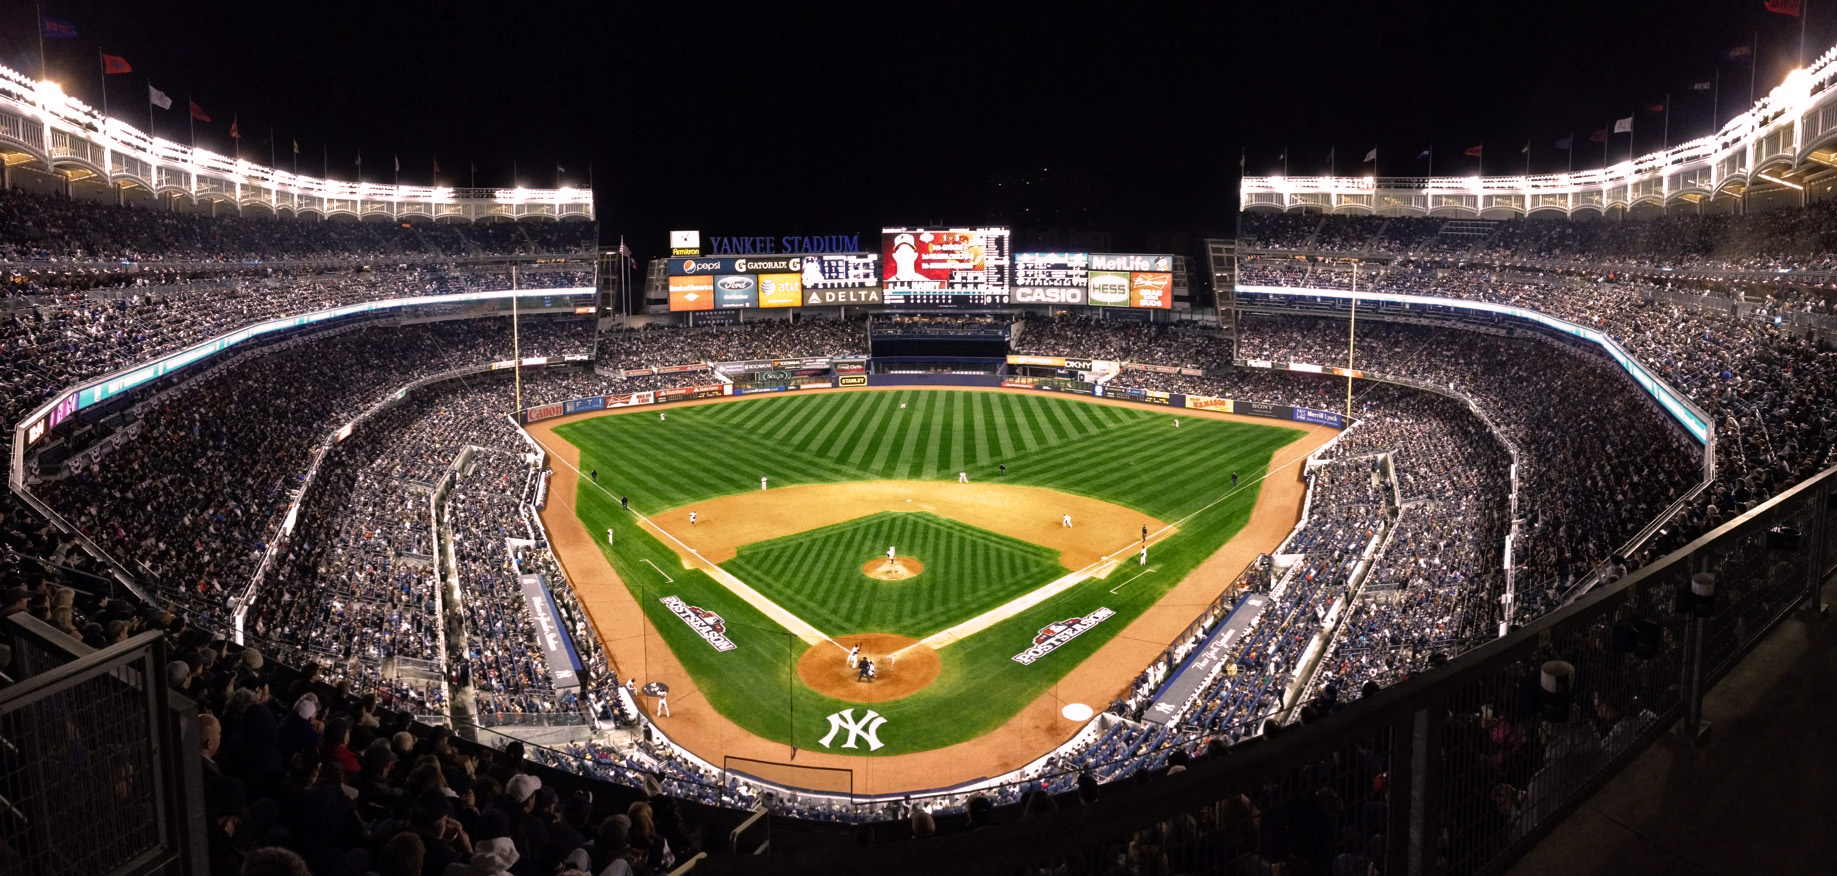 Yankee Stadium Pictures HQ  Download Free Images on Unsplash